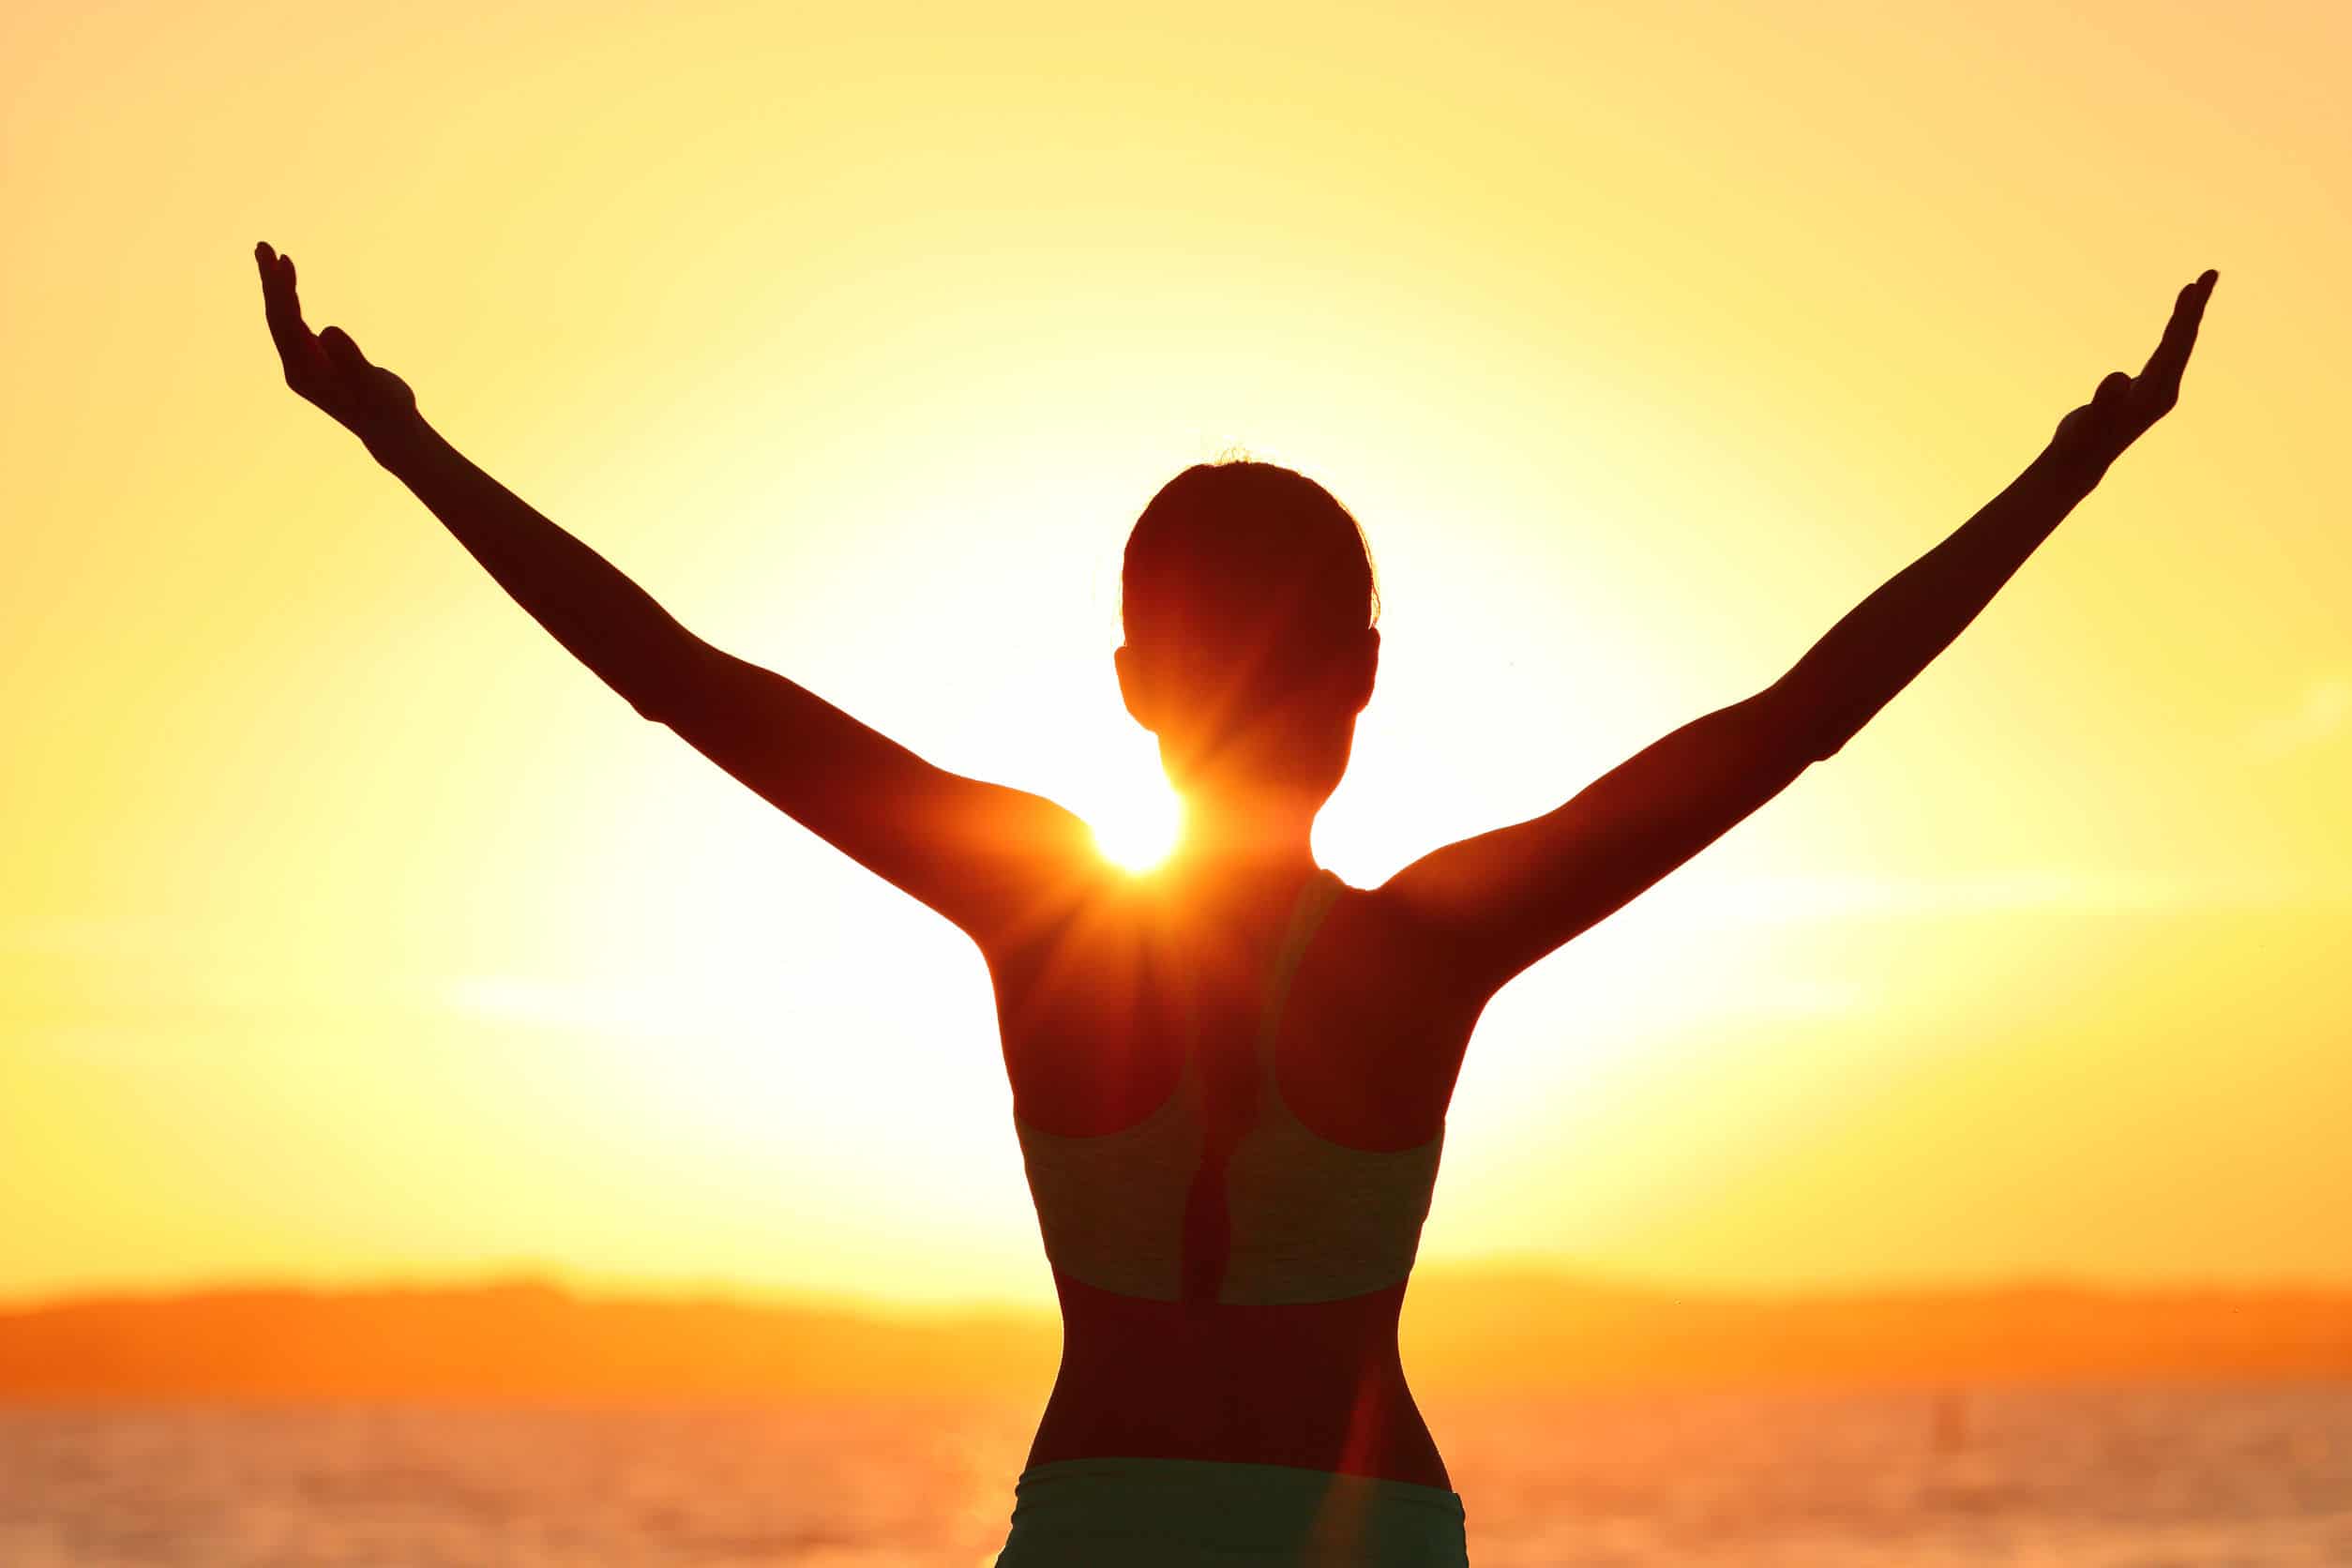 Freedom Woman With Open Arms Silhouette In Sunrise Against Sun Flare Morning Yoga Girl